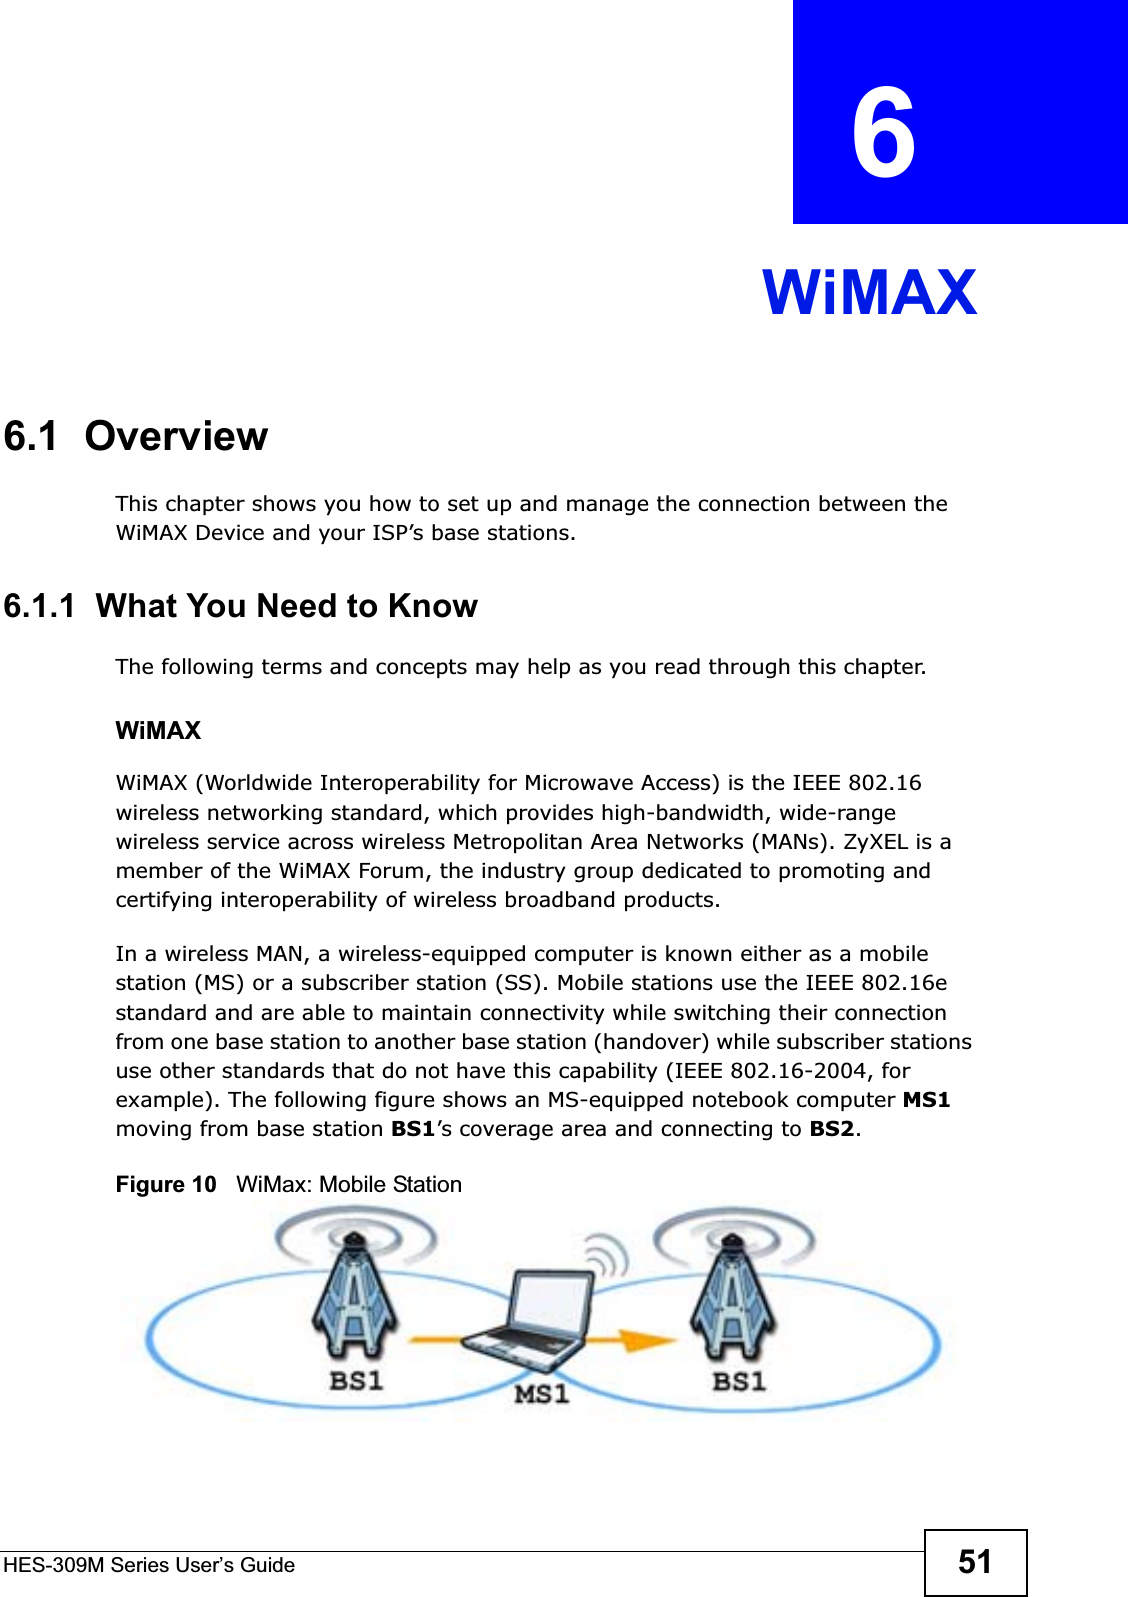 HES-309M Series User’s Guide 51CHAPTER  6 WiMAX6.1  OverviewThis chapter shows you how to set up and manage the connection between the WiMAX Device and your ISP’s base stations.6.1.1  What You Need to KnowThe following terms and concepts may help as you read through this chapter.WiMAX WiMAX (Worldwide Interoperability for Microwave Access) is the IEEE 802.16 wireless networking standard, which provides high-bandwidth, wide-range wireless service across wireless Metropolitan Area Networks (MANs). ZyXEL is a member of the WiMAX Forum, the industry group dedicated to promoting and certifying interoperability of wireless broadband products.In a wireless MAN, a wireless-equipped computer is known either as a mobile station (MS) or a subscriber station (SS). Mobile stations use the IEEE 802.16e standard and are able to maintain connectivity while switching their connection from one base station to another base station (handover) while subscriber stations use other standards that do not have this capability (IEEE 802.16-2004, for example). The following figure shows an MS-equipped notebook computer MS1moving from base station BS1’s coverage area and connecting to BS2.Figure 10   WiMax: Mobile Station